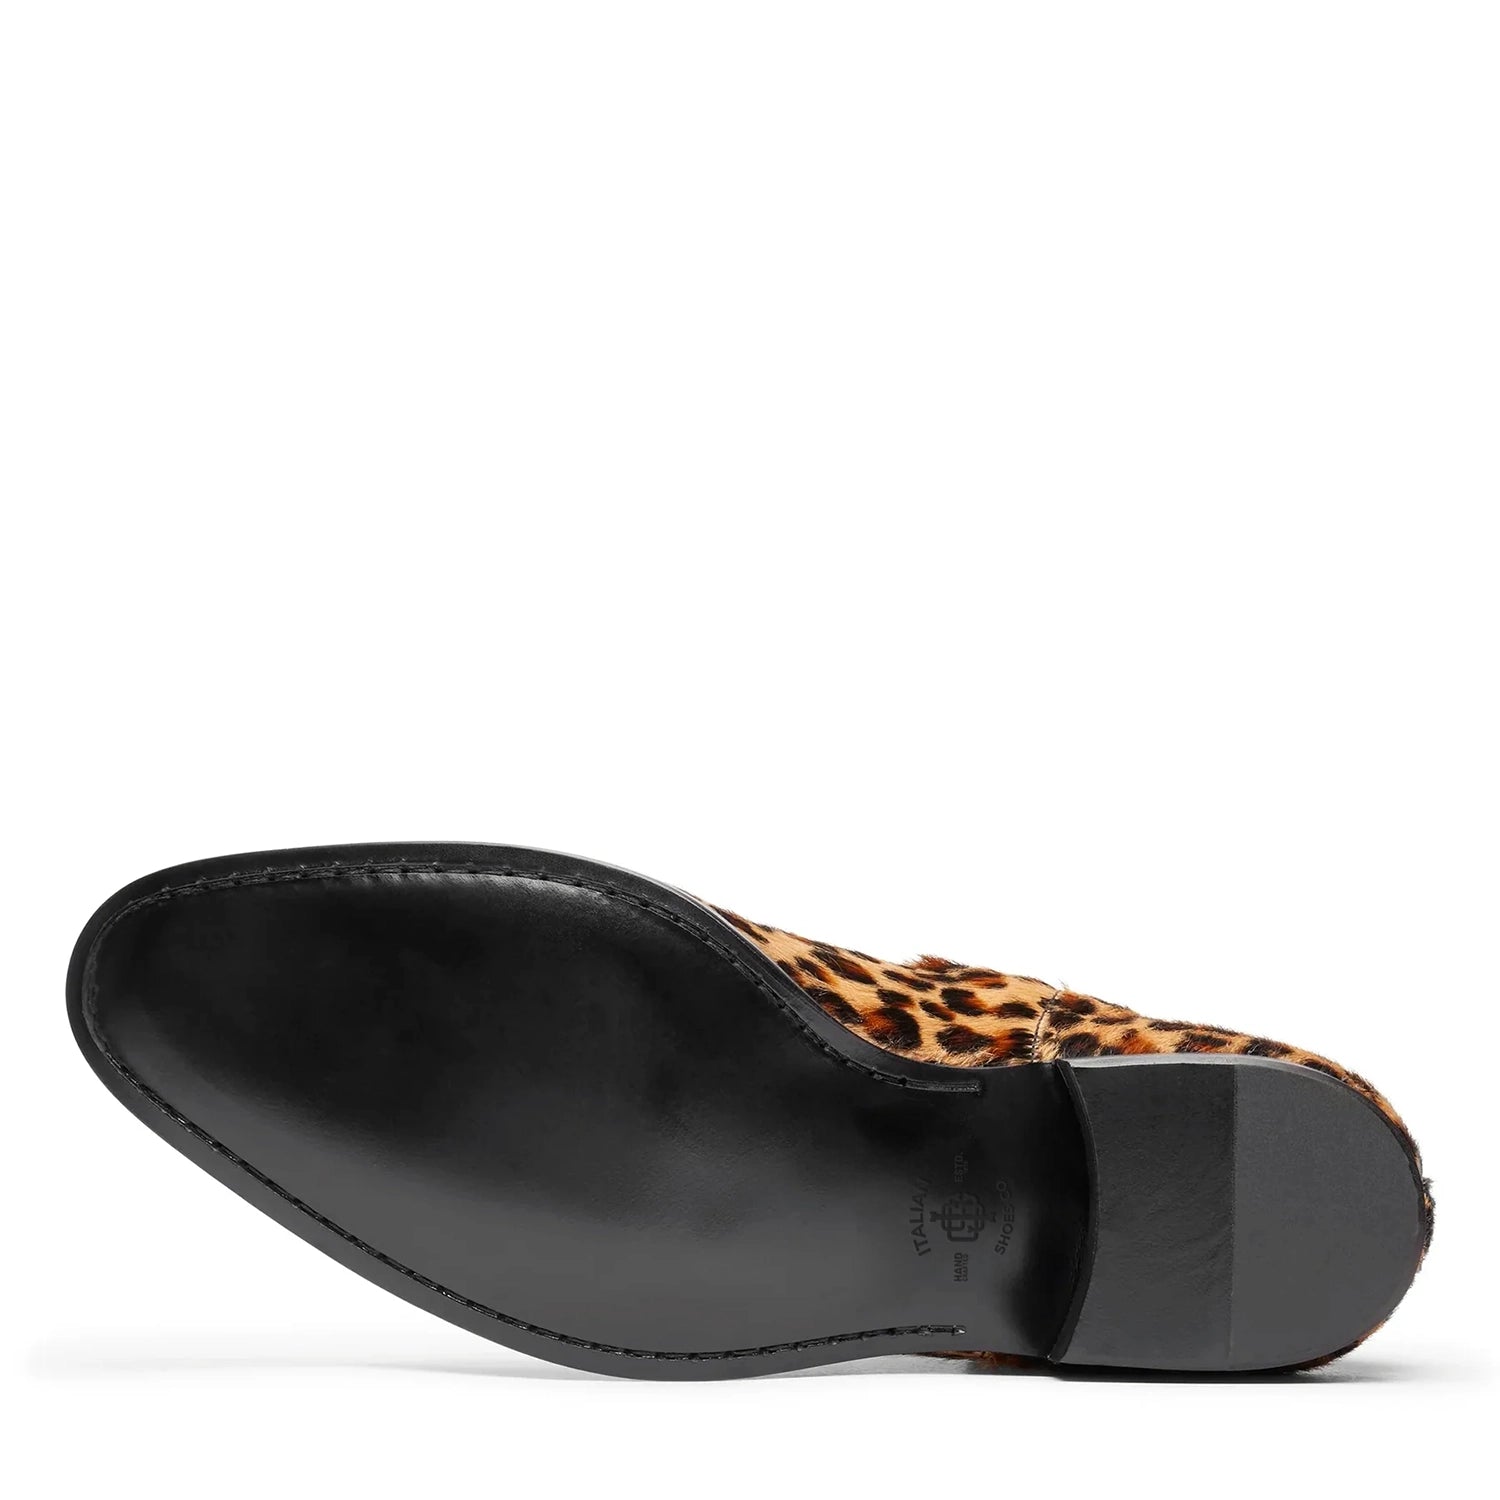 Chelsea Boot - Leopard Print Pony Hair Leather